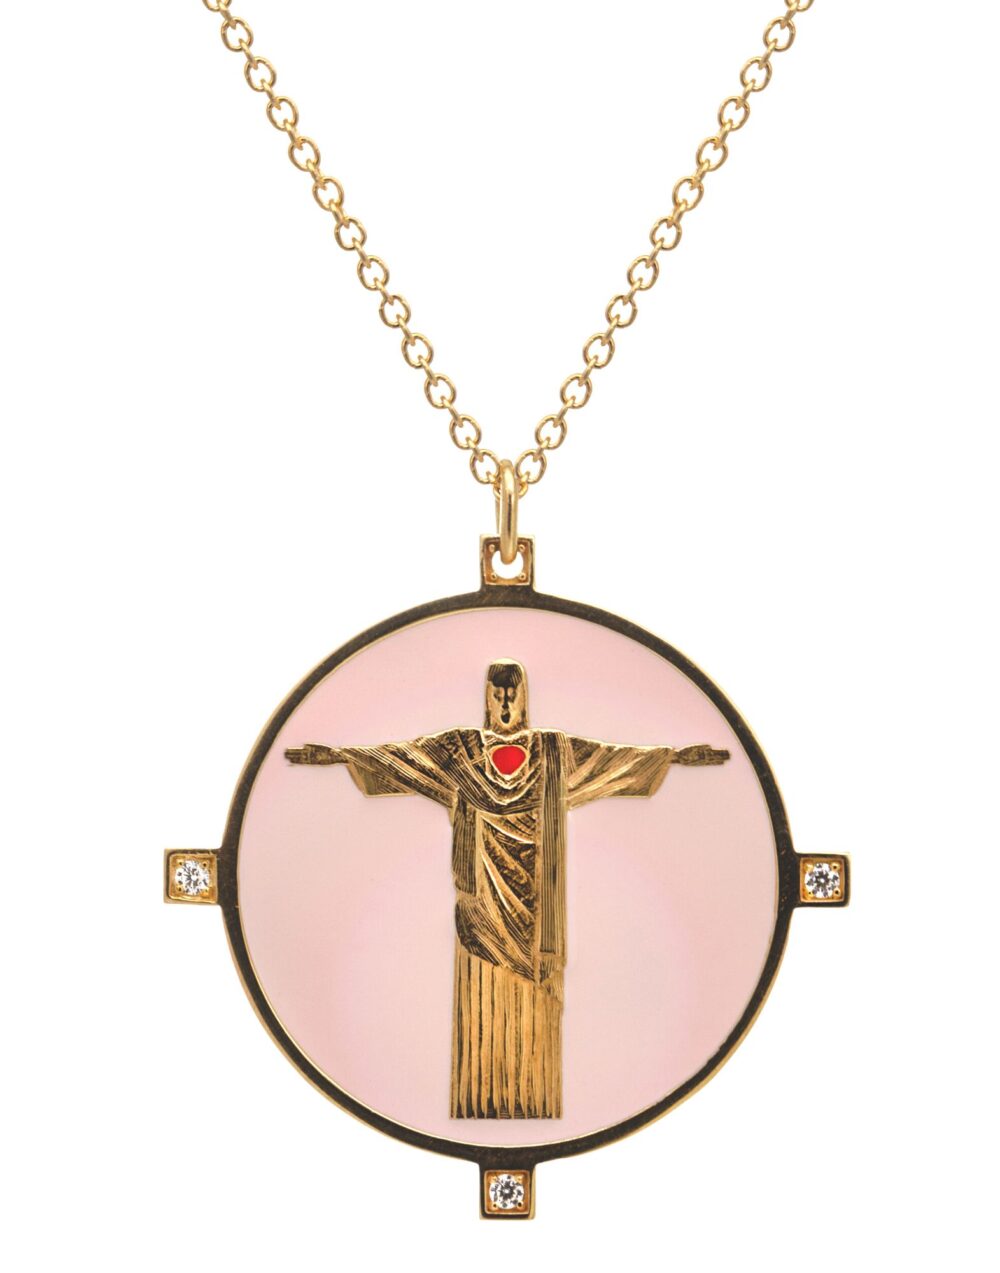 corcovado enamel pink necklace, Thais Bernardes jewellery 925 gold-plated silver